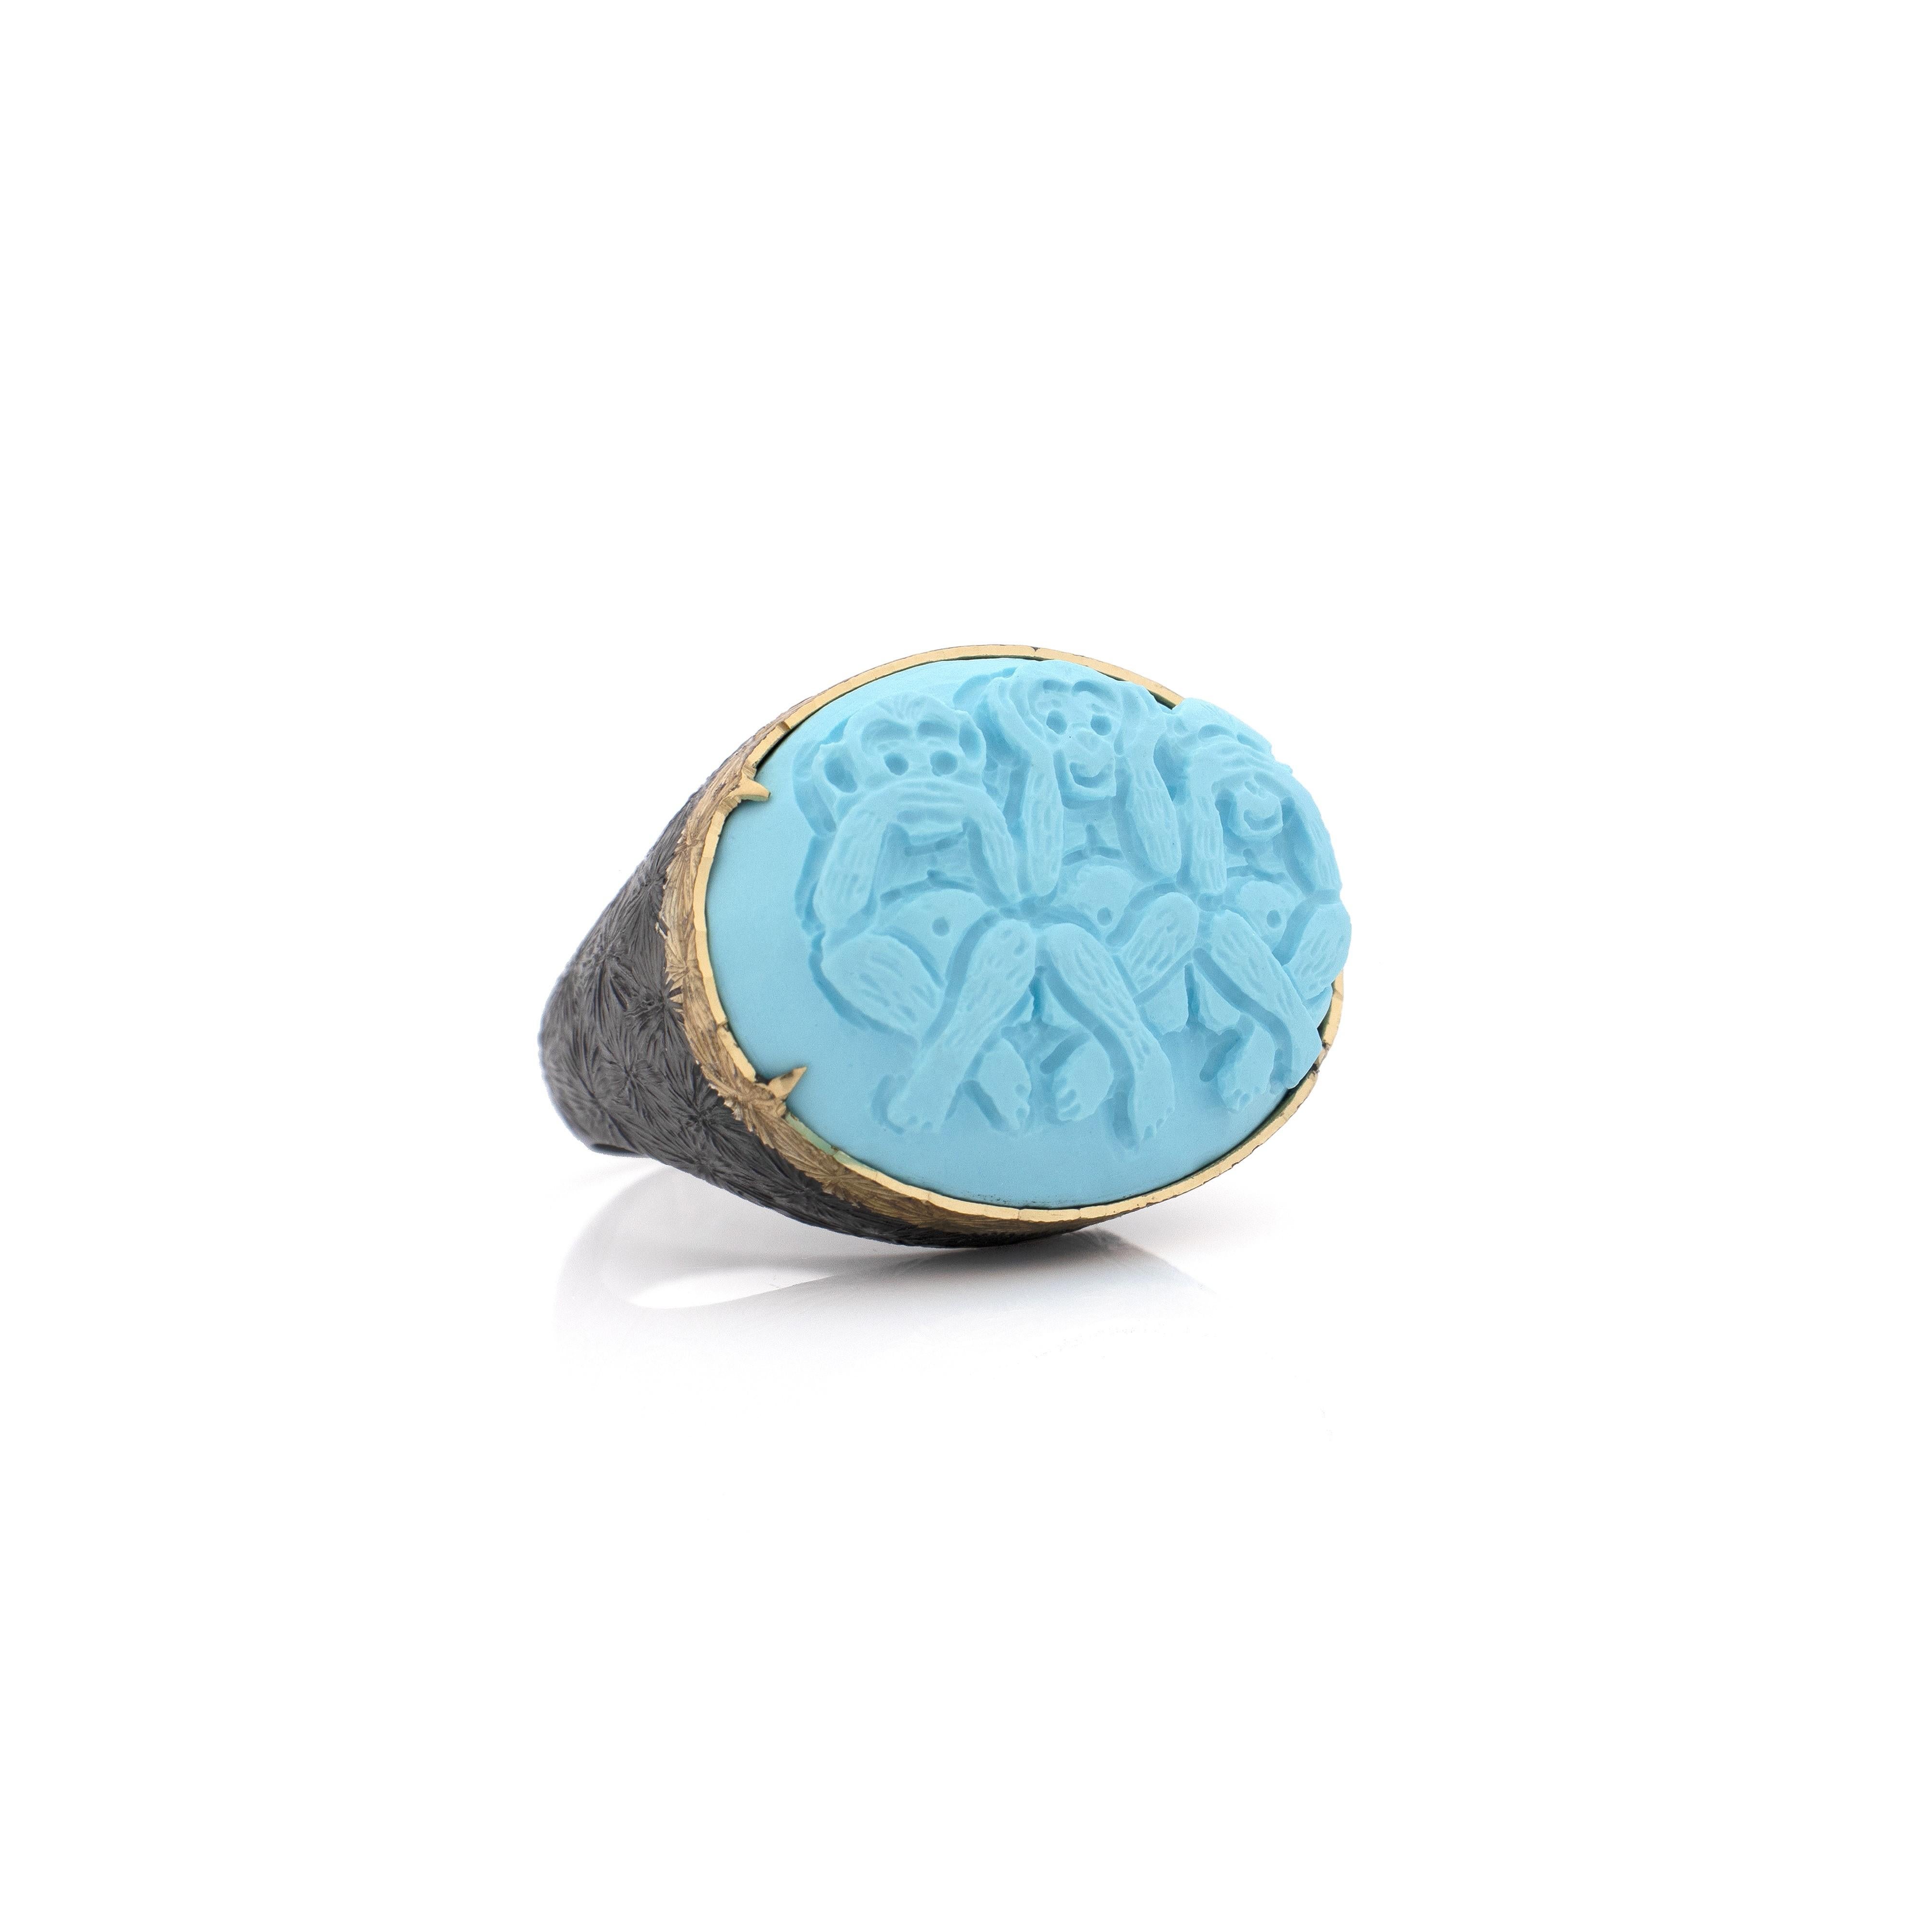 25mm turquoise cameo hand-carved on 18kt gold and sterling silver black rhodium.